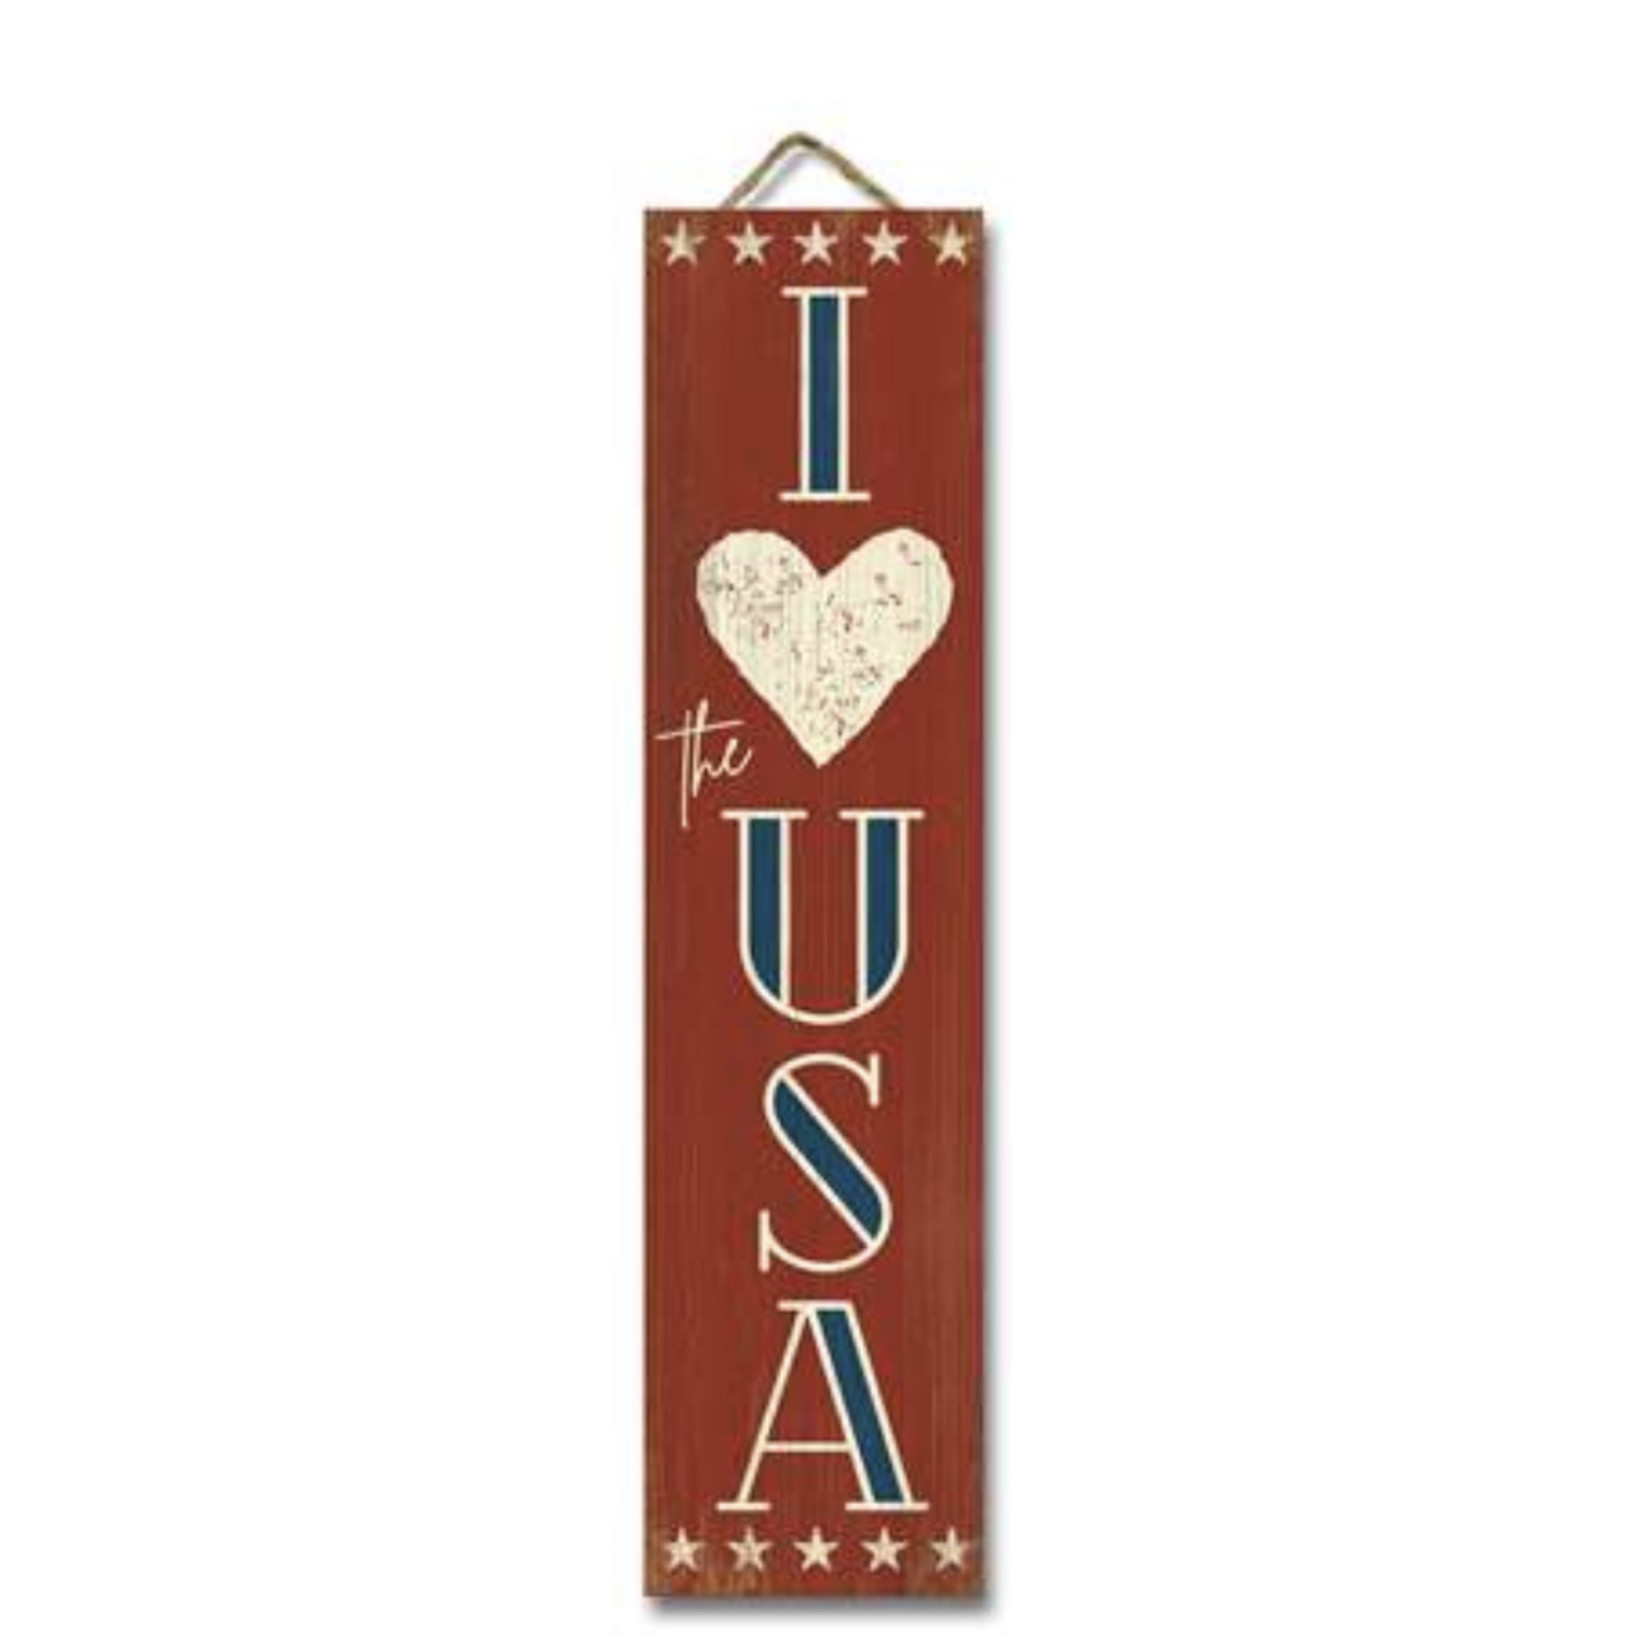 My Word! I Love the USA Stand Out Tall Sign